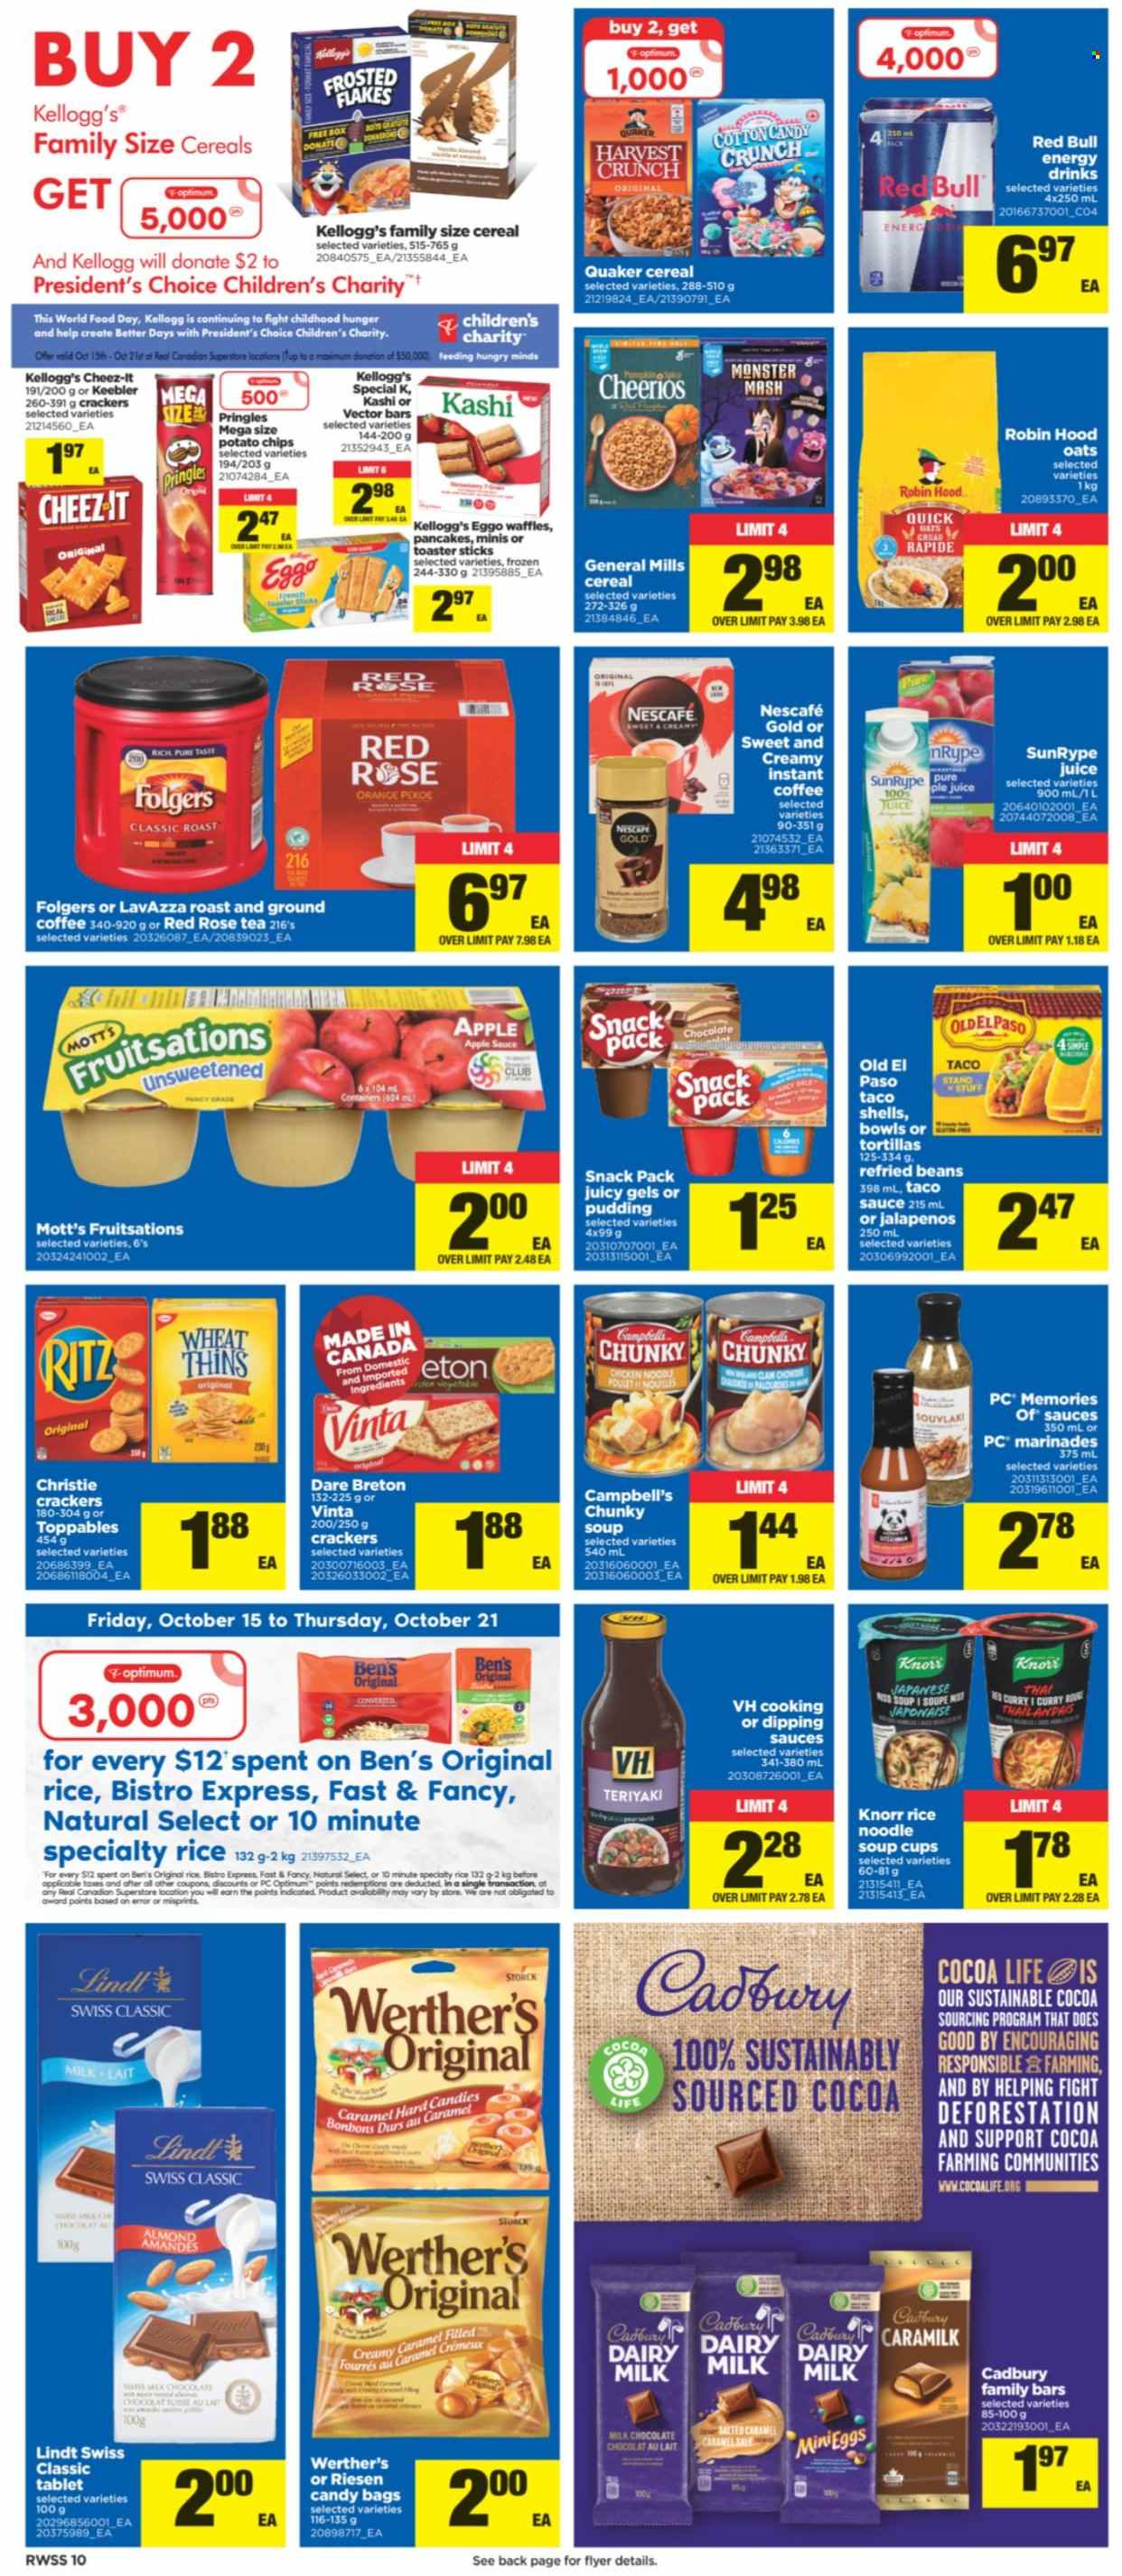 thumbnail - Real Canadian Superstore Flyer - October 15, 2021 - October 21, 2021 - Sales products - tablet, tortillas, waffles, Mott's, Campbell's, soup, pancakes, Quaker, noodles, Président, pudding, eggs, milk chocolate, chocolate, cotton candy, crackers, Kellogg's, Cadbury, Dairy Milk, Keebler, RITZ, potato chips, Pringles, Thins, Cheez-It, oats, refried beans, Cheerios, Frosted Flakes, taco sauce, apple sauce, juice, energy drink, Monster, Red Bull, tea, instant coffee, Folgers, ground coffee, Lavazza, rosé wine, cup, Optimum, rose, Knorr, toaster, Lindt, Nescafé, oranges. Page 10.